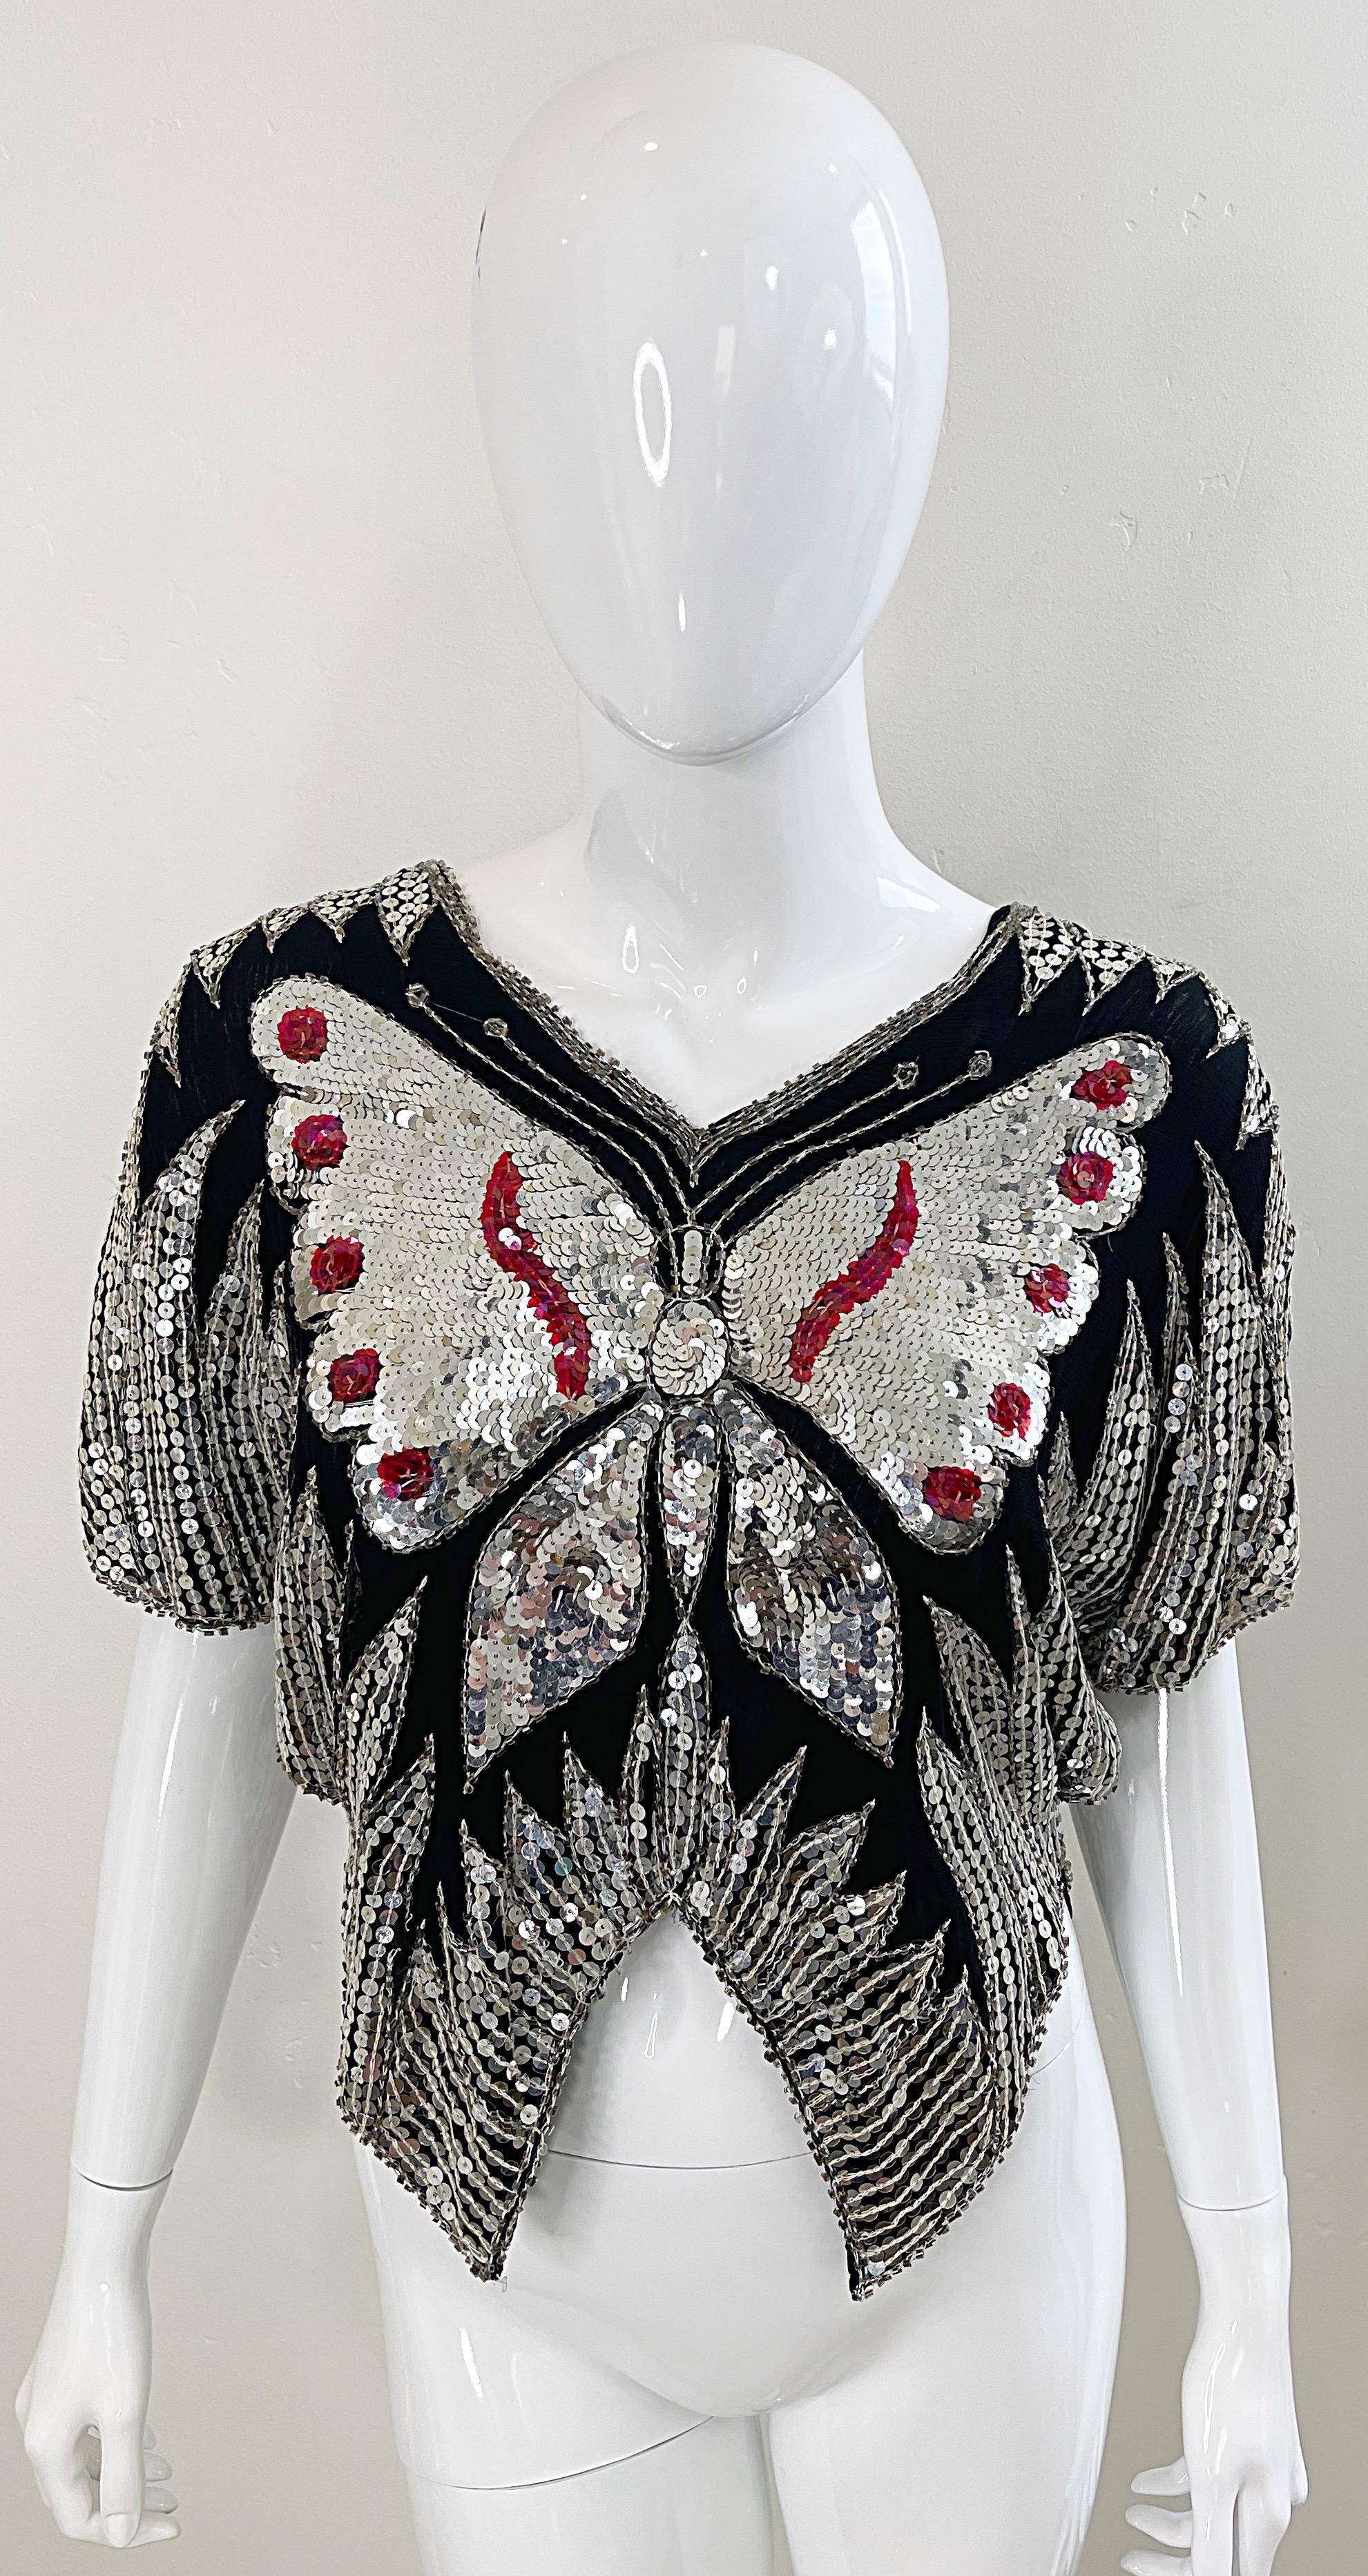 Studio 54 Early 1980s Butterfly Red Silver Black Sequin Disco Vintage 80s Top In Excellent Condition For Sale In San Diego, CA